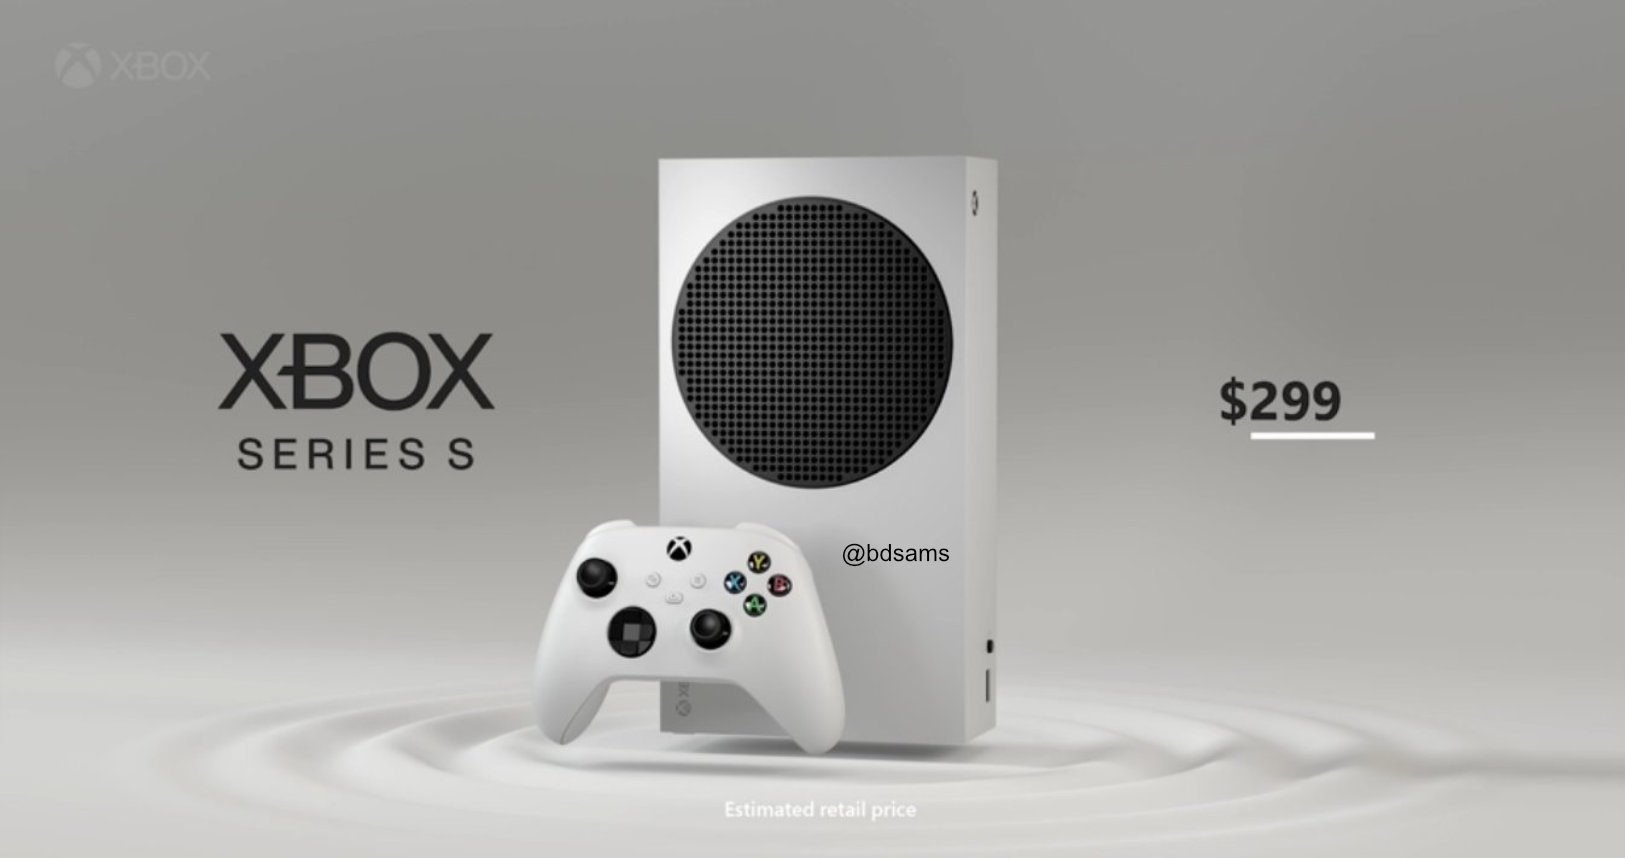 Kan niet cijfer bidden Microsoft Xbox Series X, Xbox Series S prices and release date leaked